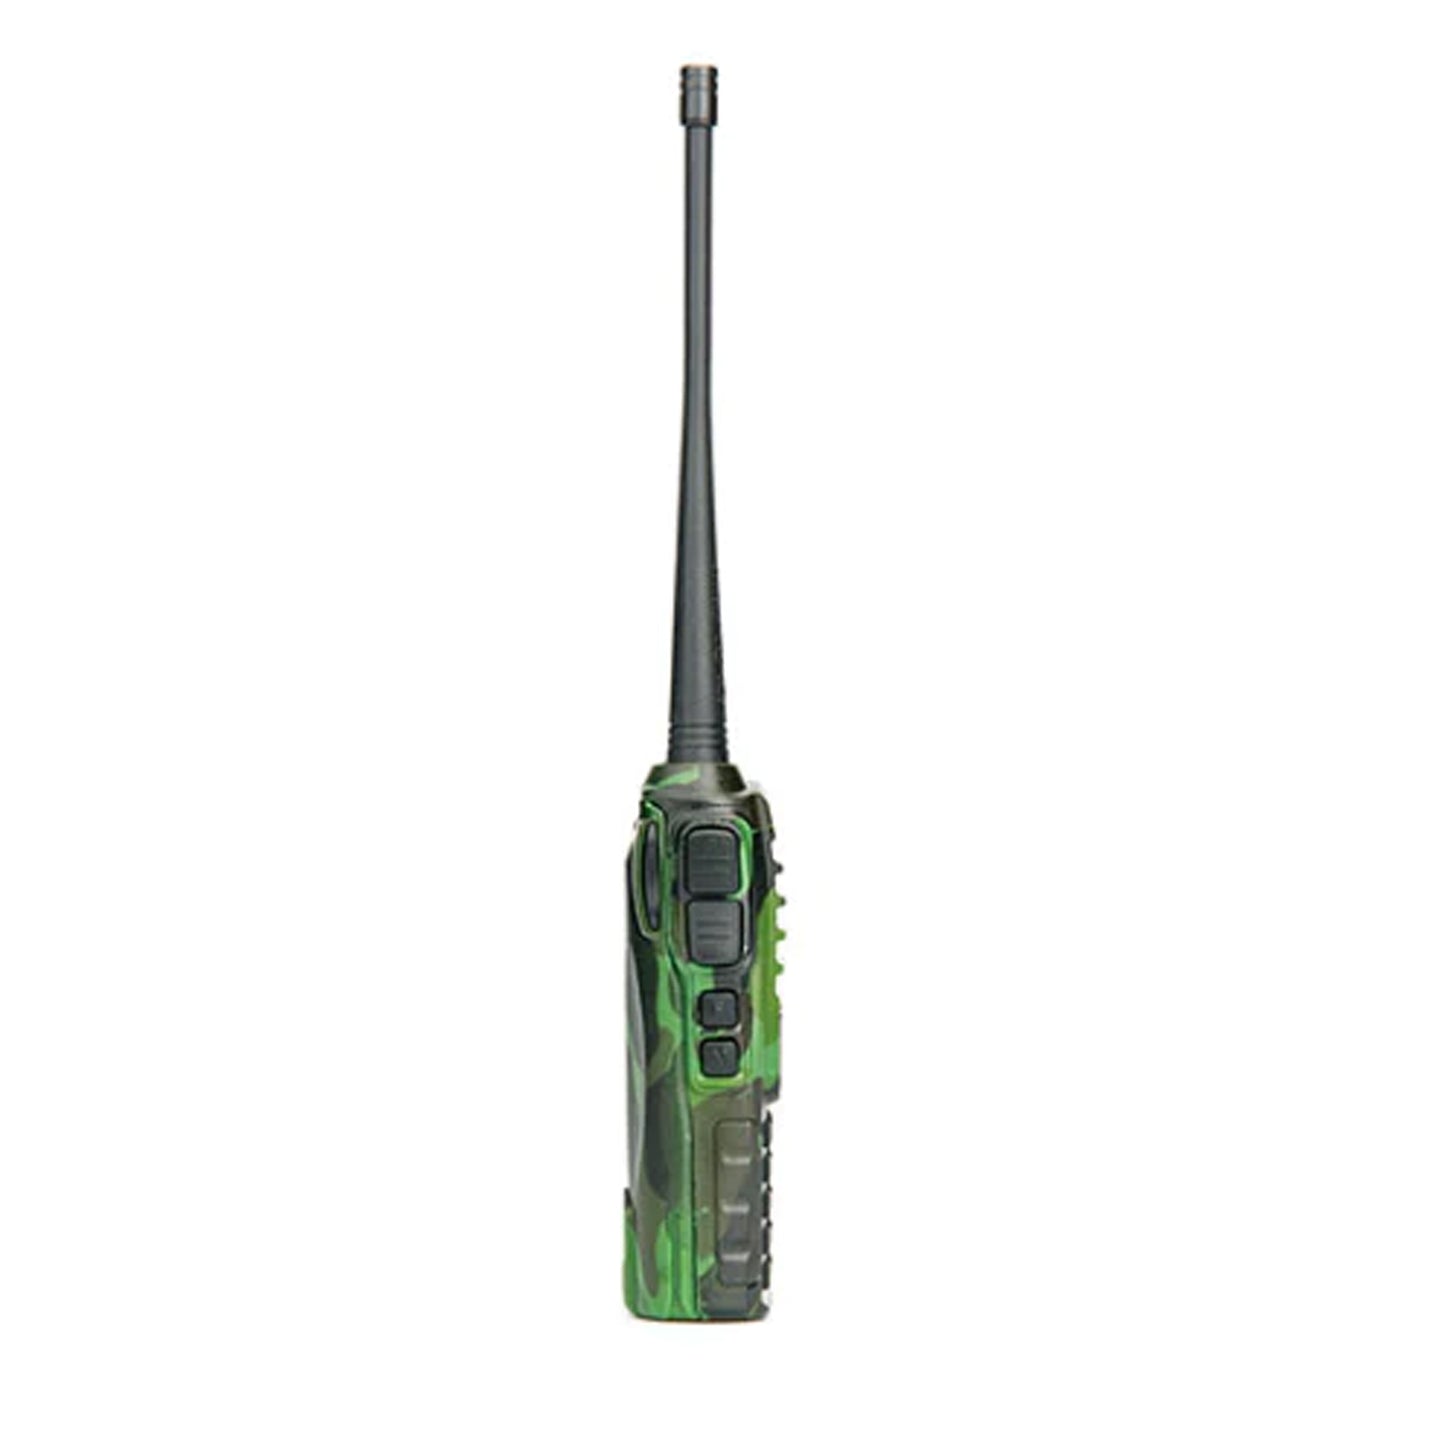 BaoFeng UV-82 (Set of 5/6/7/8/9/10) Walkie-Talkie Dual-Band VHF/UHF Transceiver 5W PC Programmable Two-Way Radio with 128 Store Channels, 136-174/400-520MHz Frequency Range, 8km Max. Talking Range, Clear Voice Output (Green)